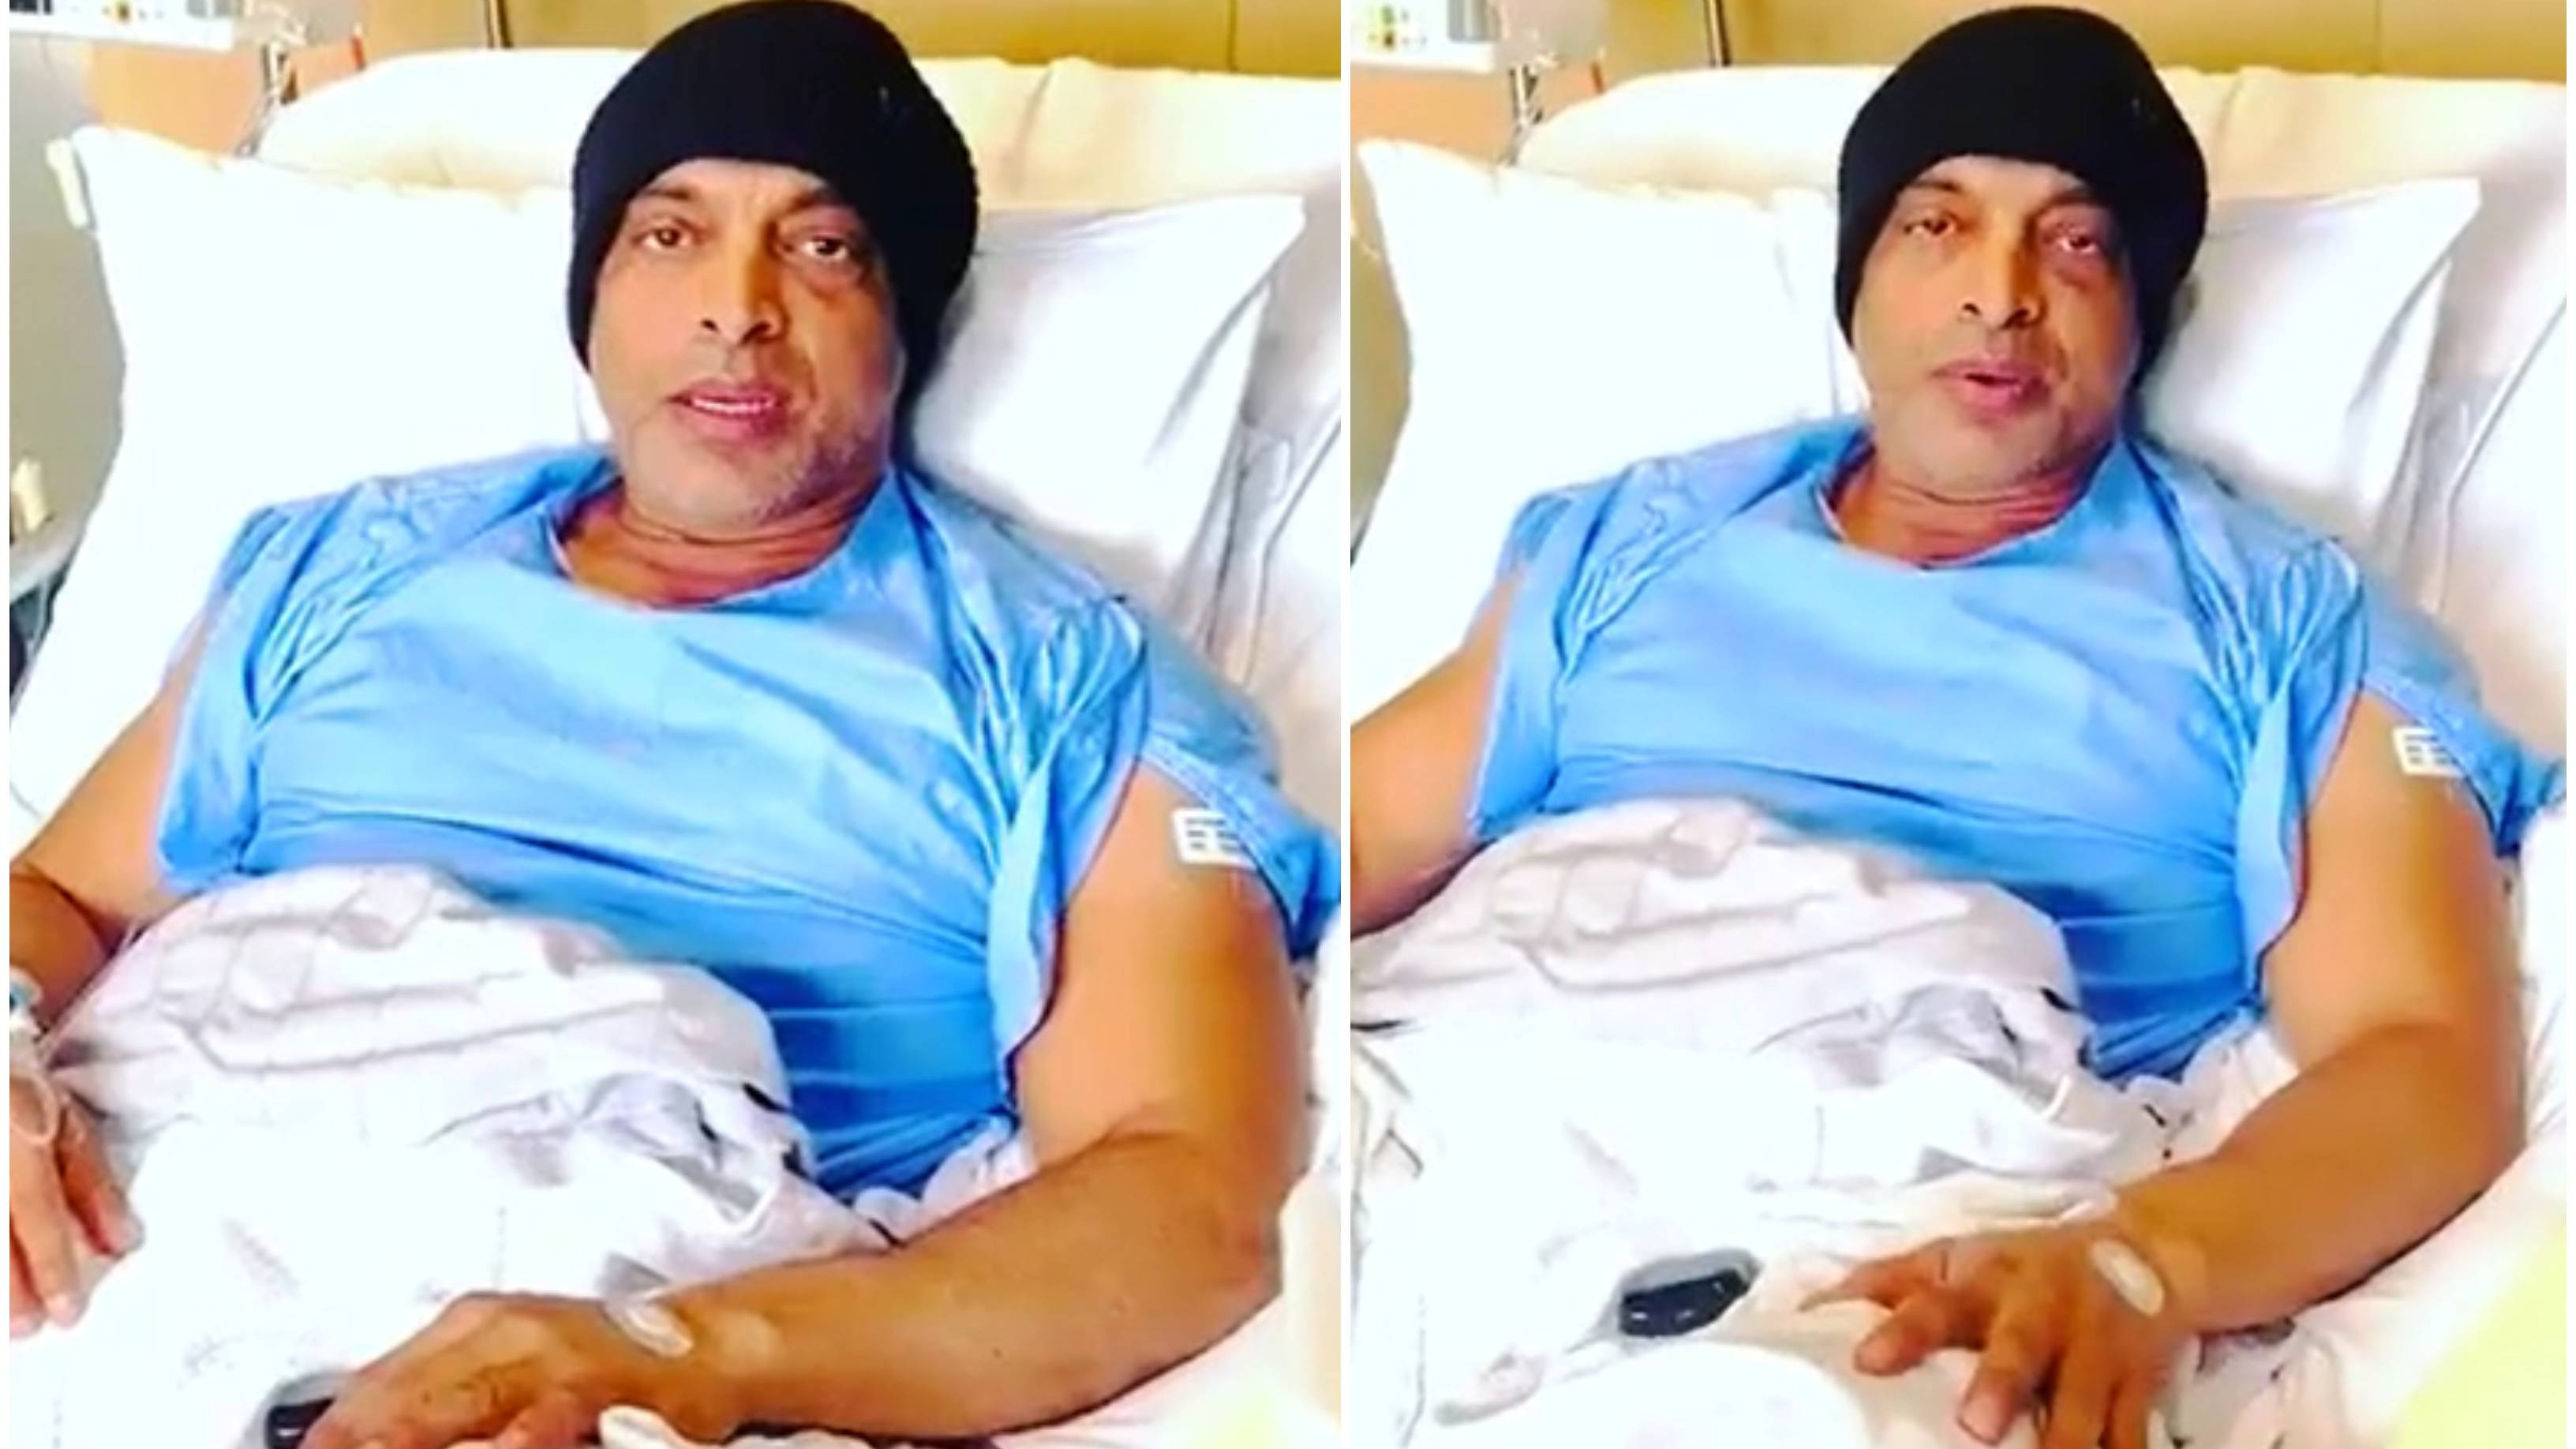 WATCH: “I am in pain, hopefully this is my last surgery” – Shoaib Akhtar’s emotional video from hospital bed